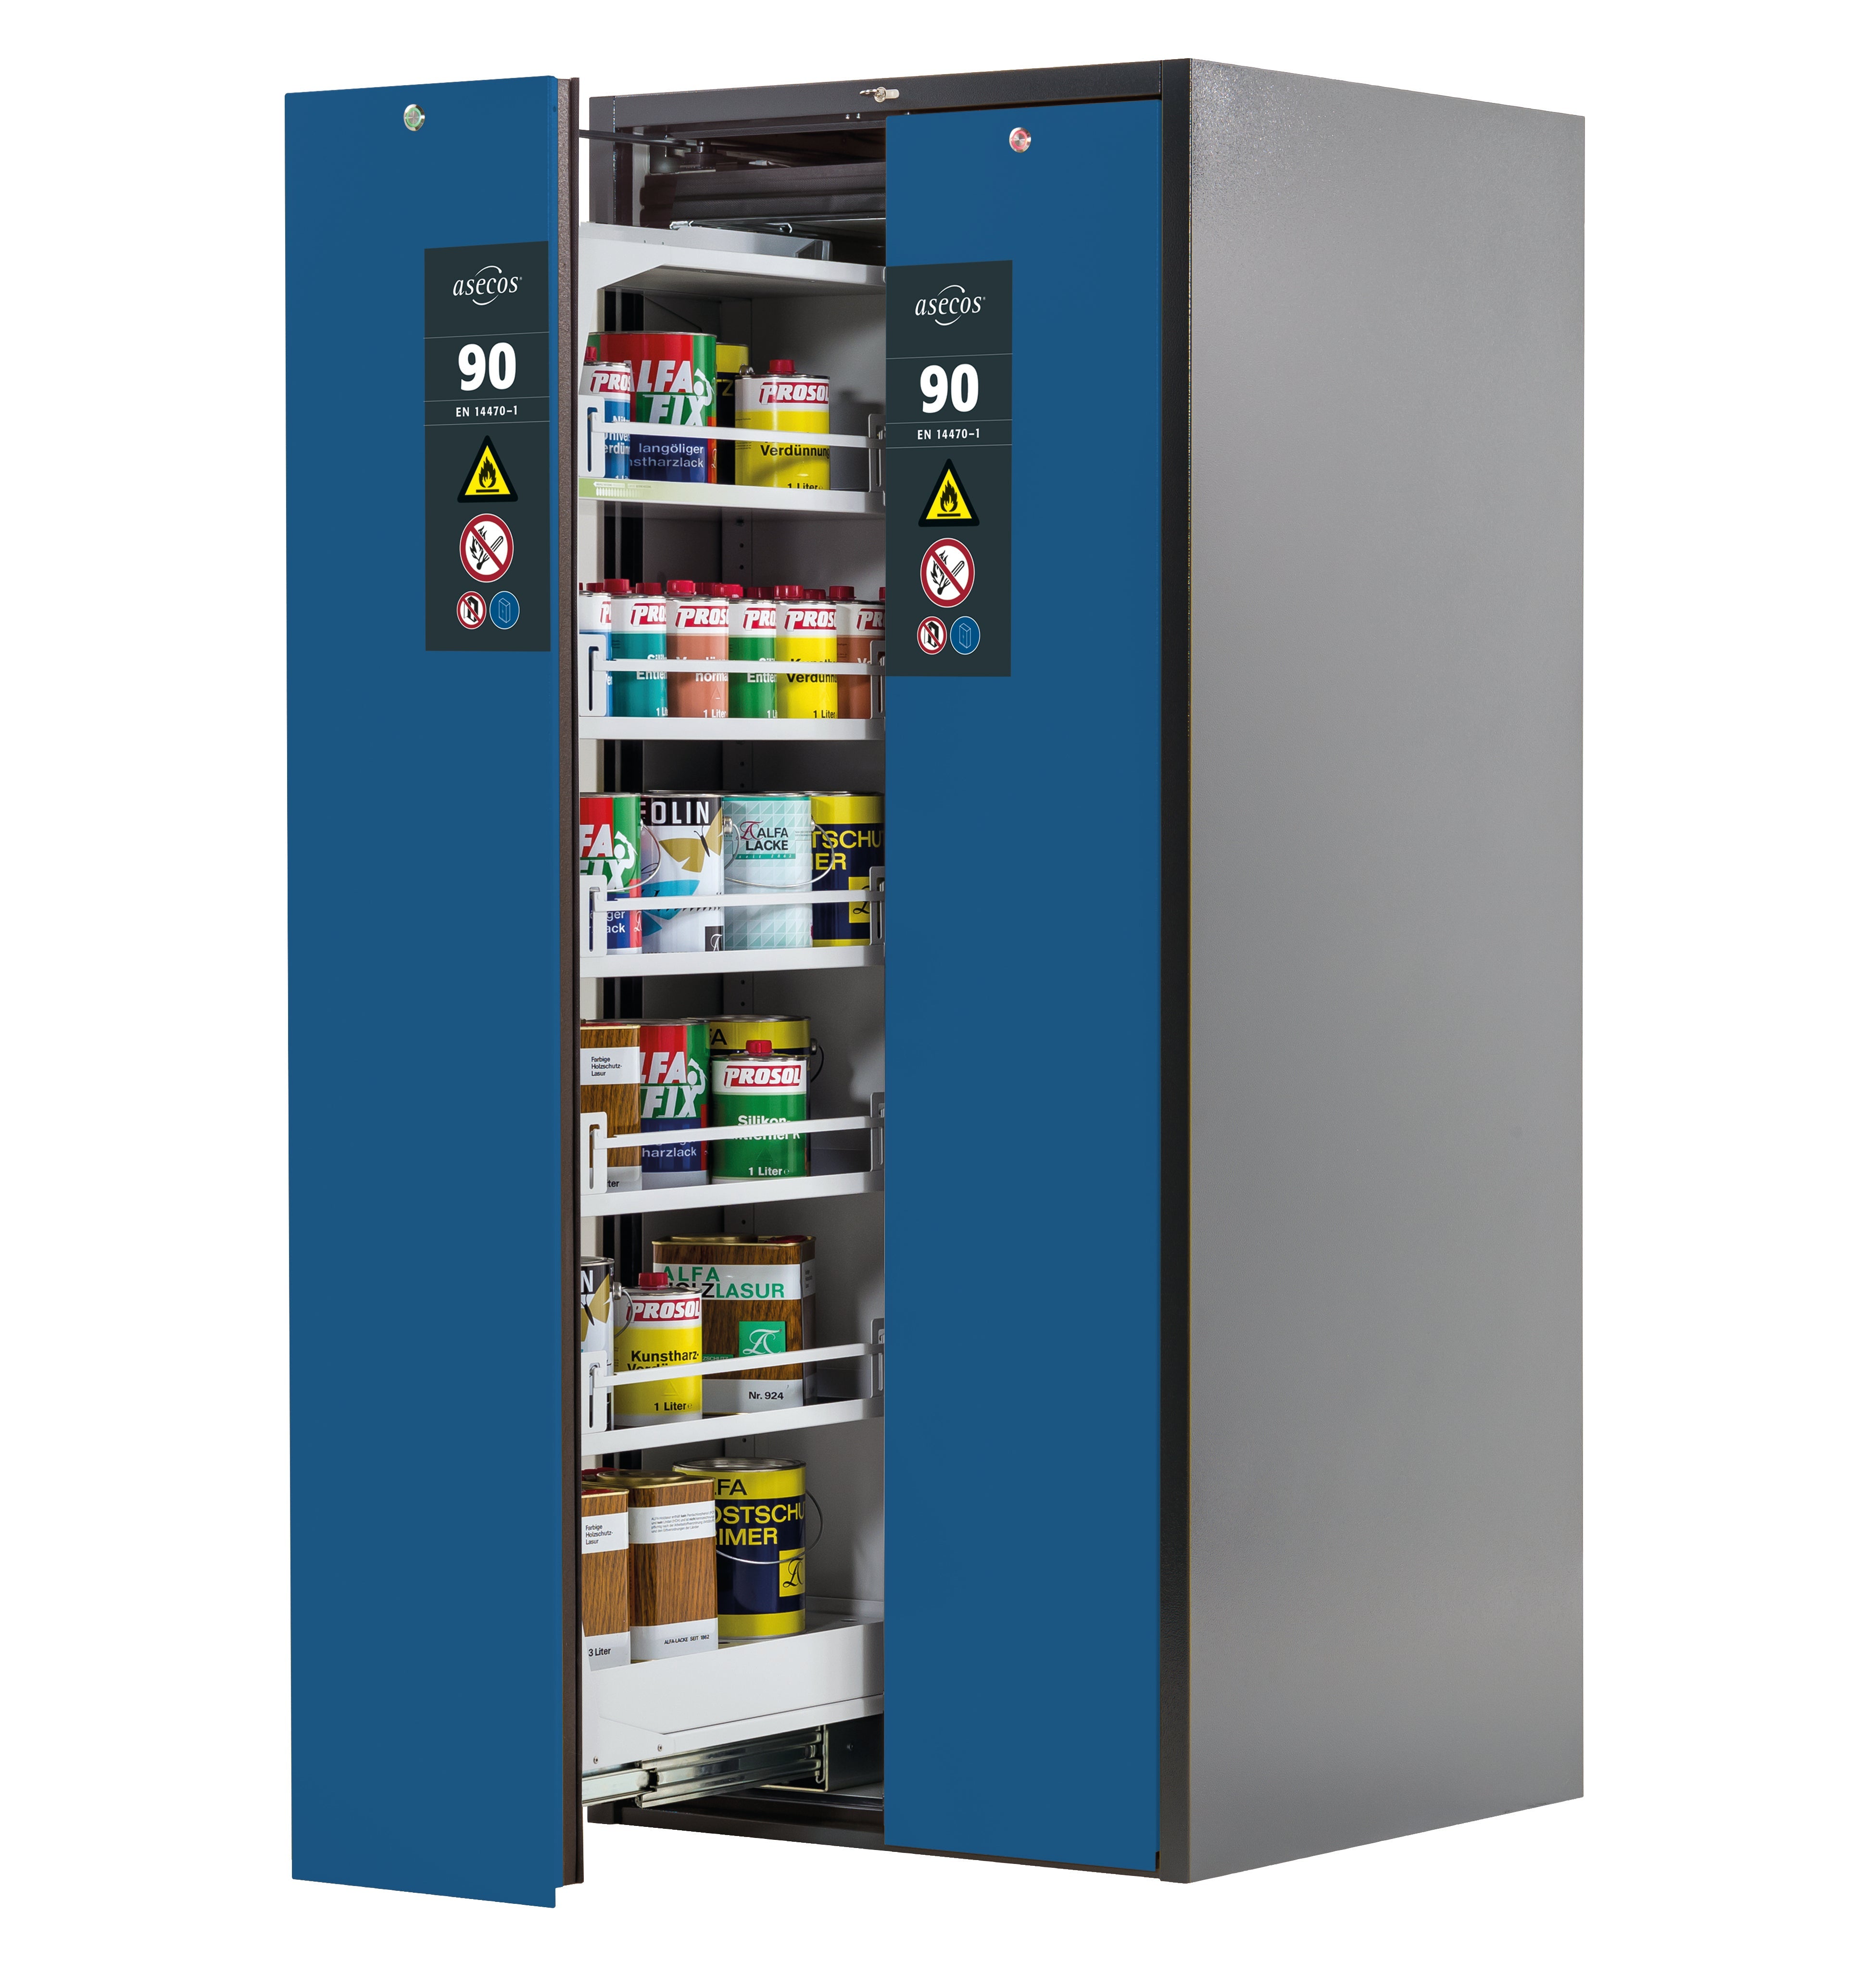 Type 90 safety cabinet V-MOVE-90 model V90.196.081.VDAC:0013 in gentian blue RAL 5010 with 5x standard shelves (sheet steel)